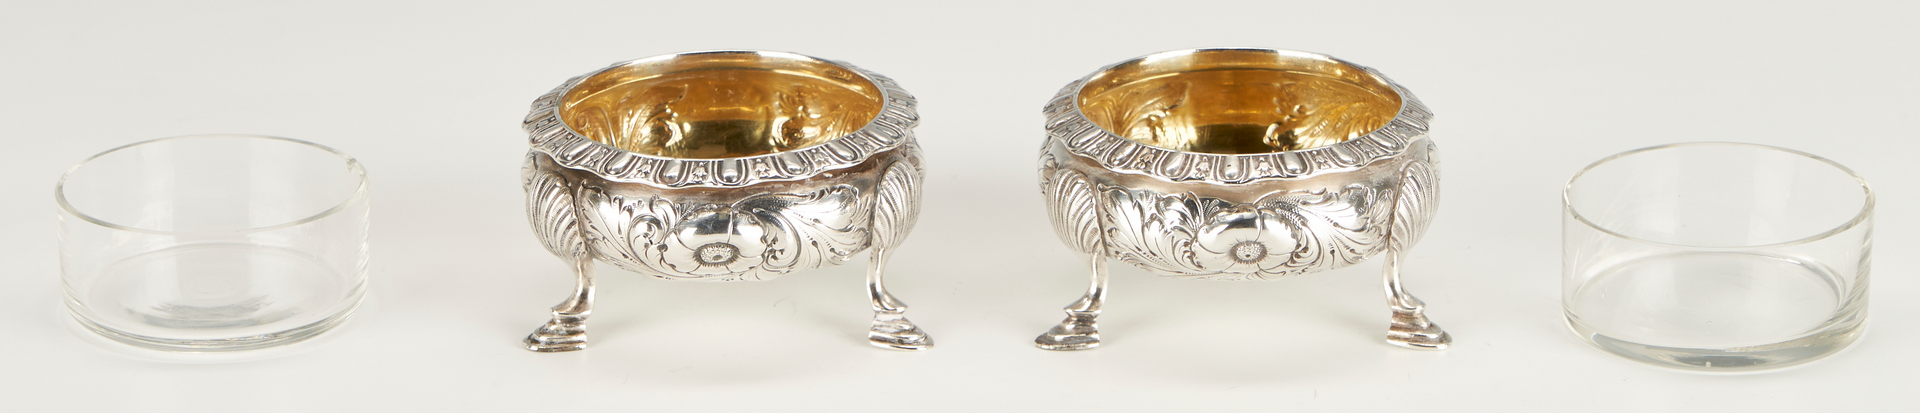 Lot 1233: 5 Sterling Silver Items, incl. Reed & Barton Francis I